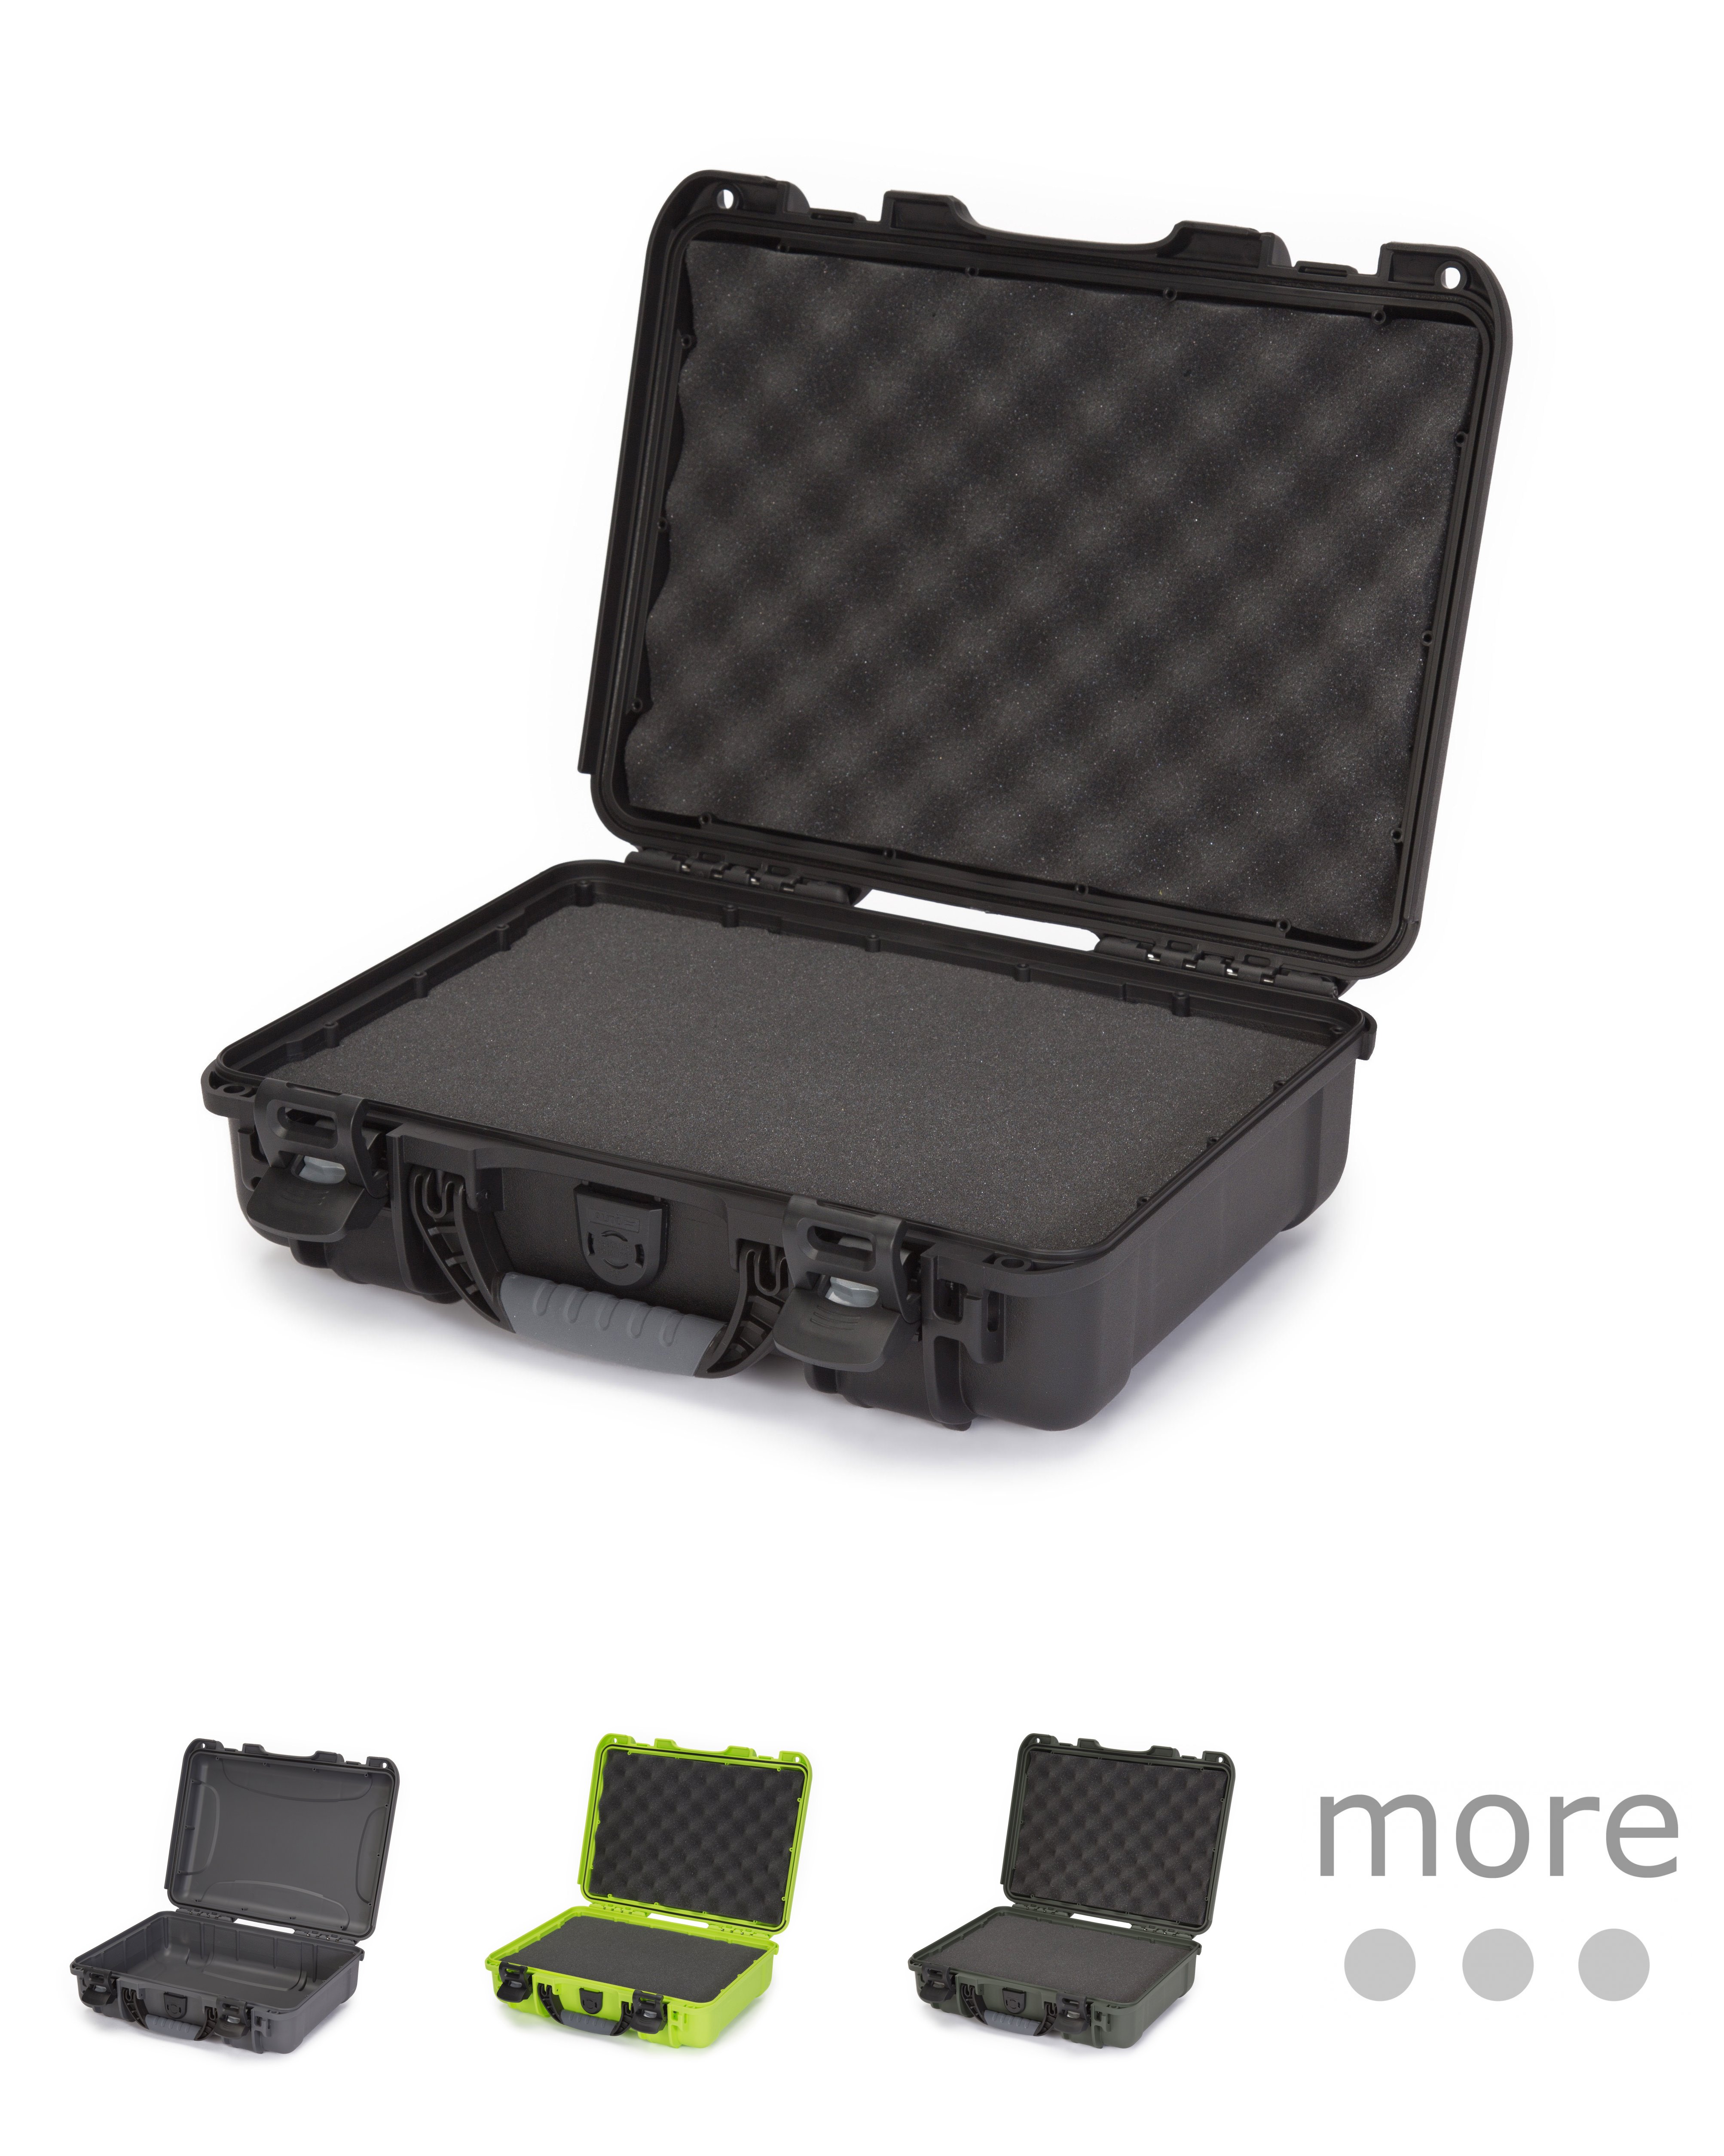 Nanuk 910 Protective Hard Case | Up to 51% Off 5 Star Rating w 